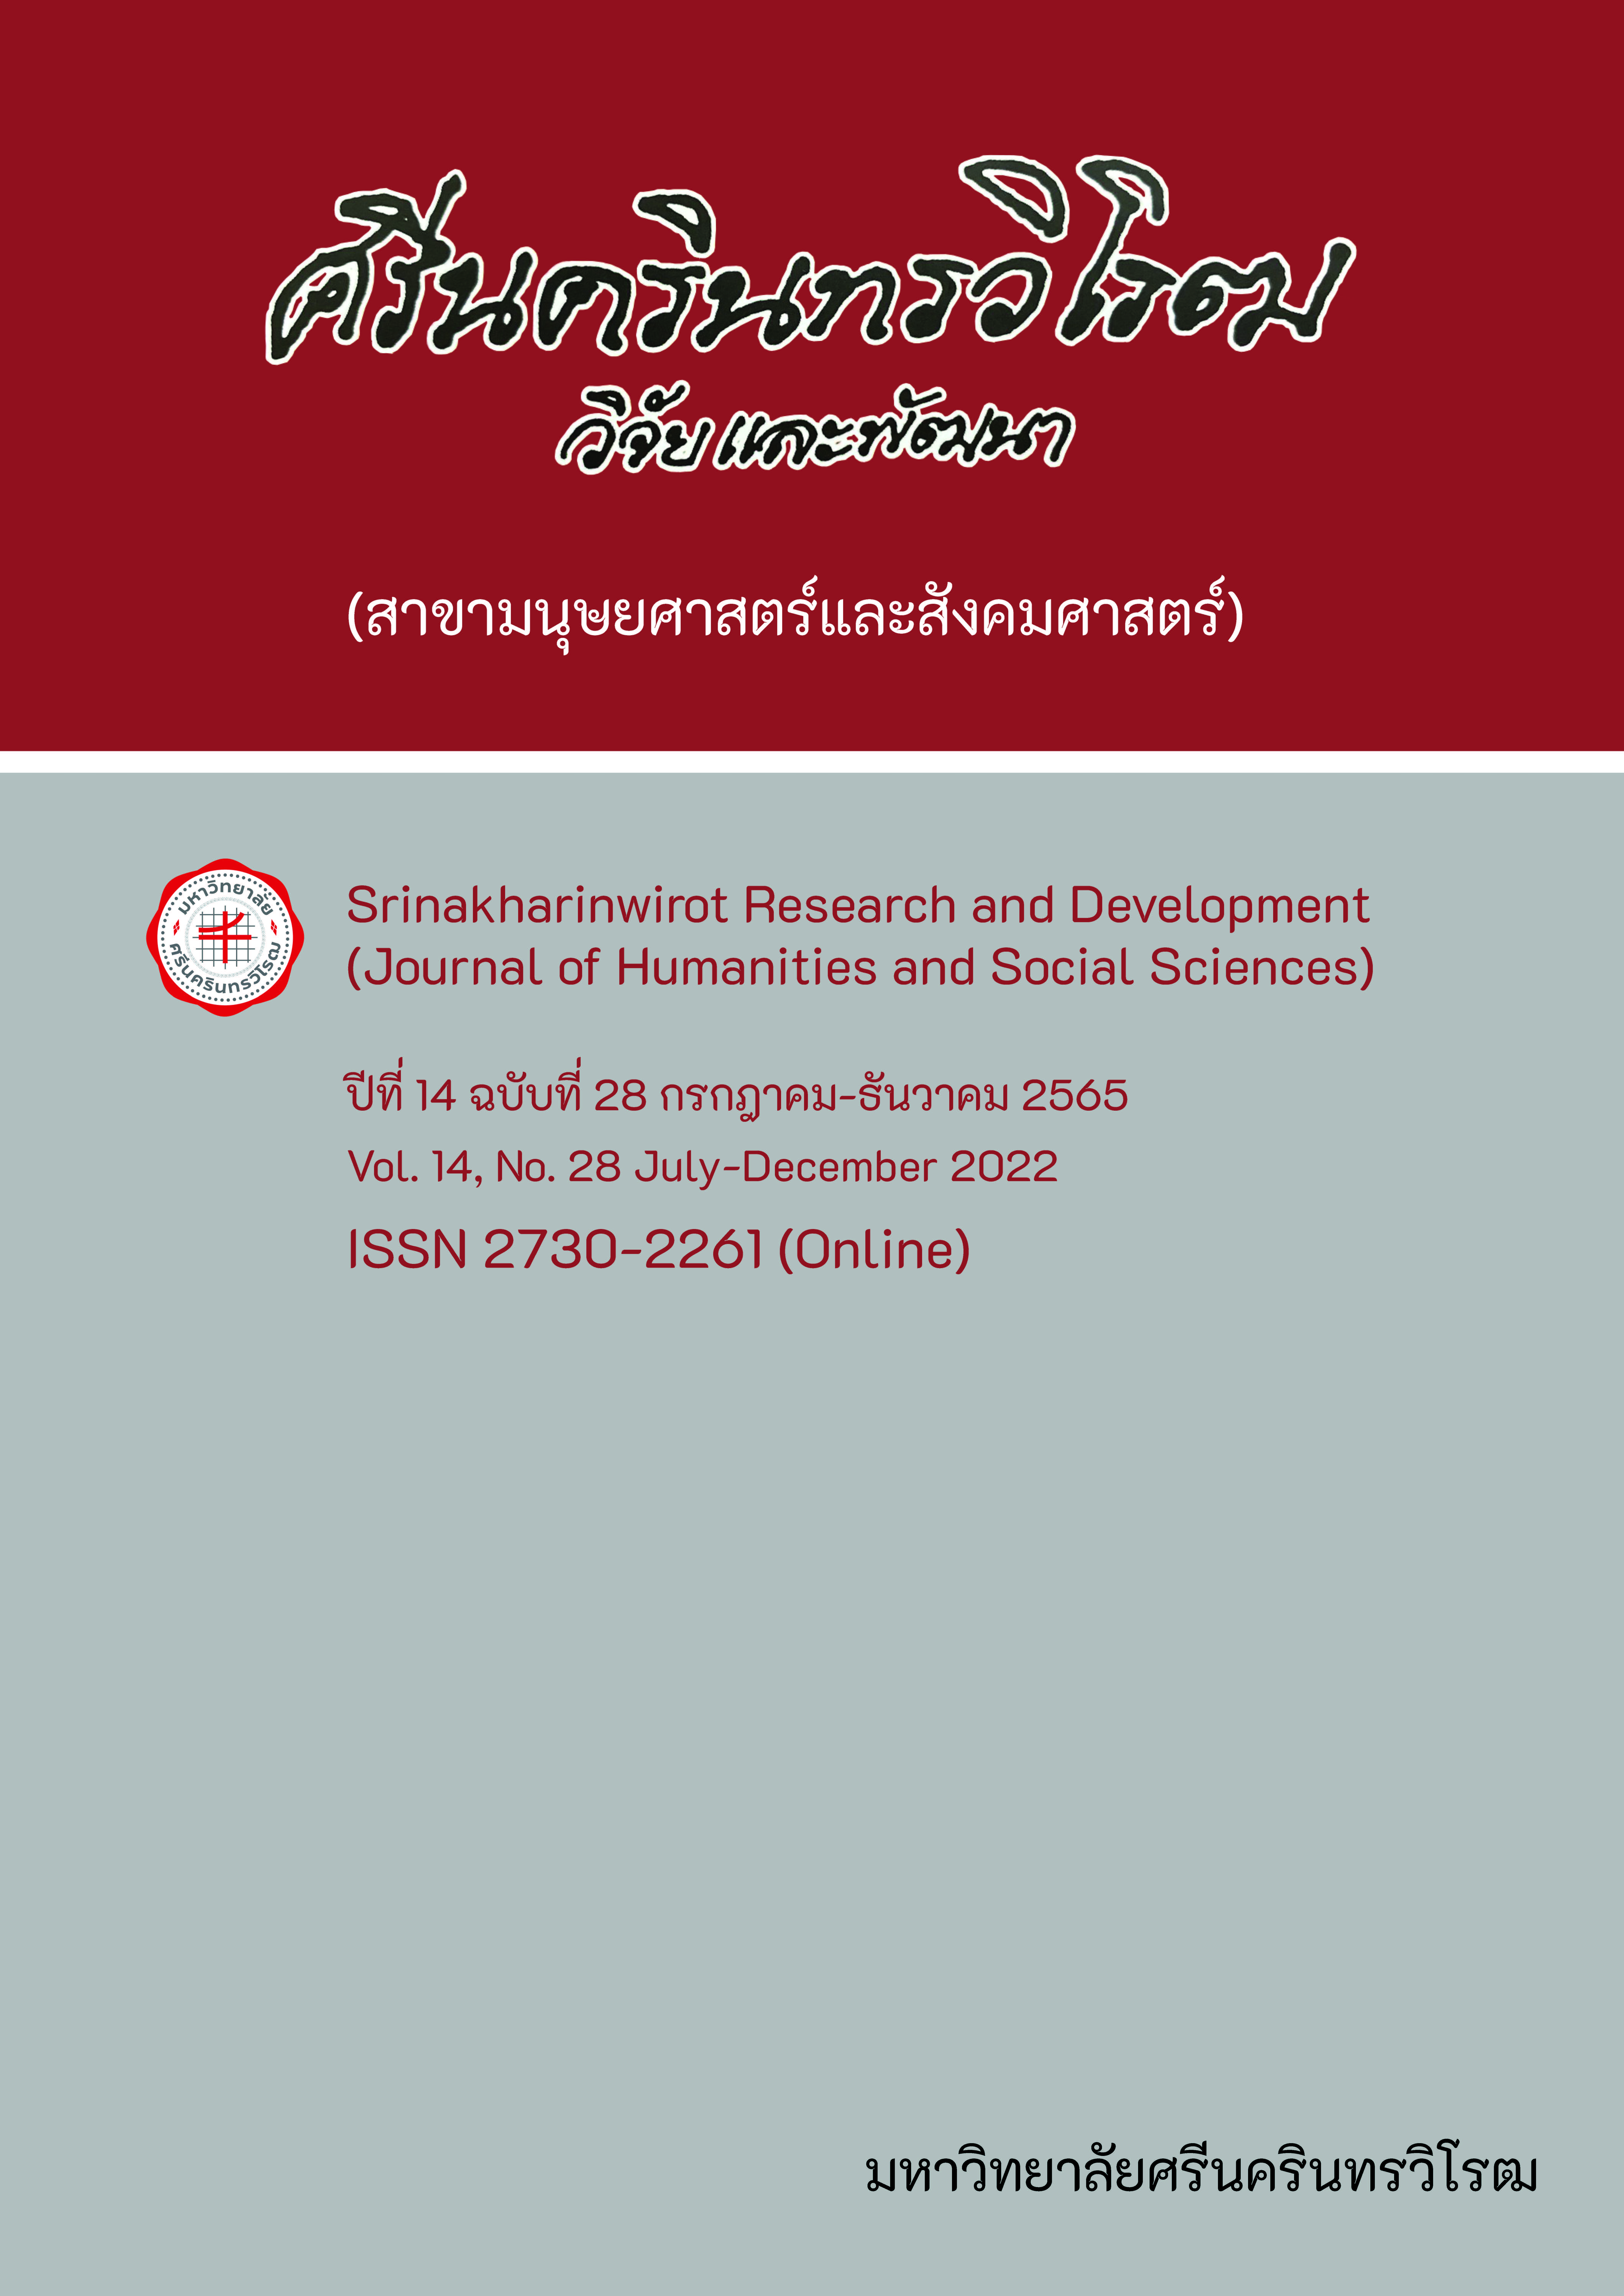 					View Vol. 14 No. 28, July-December (2022): Srinakharinwirot Research and Development (Journal of Humanities and Social Sciences)
				